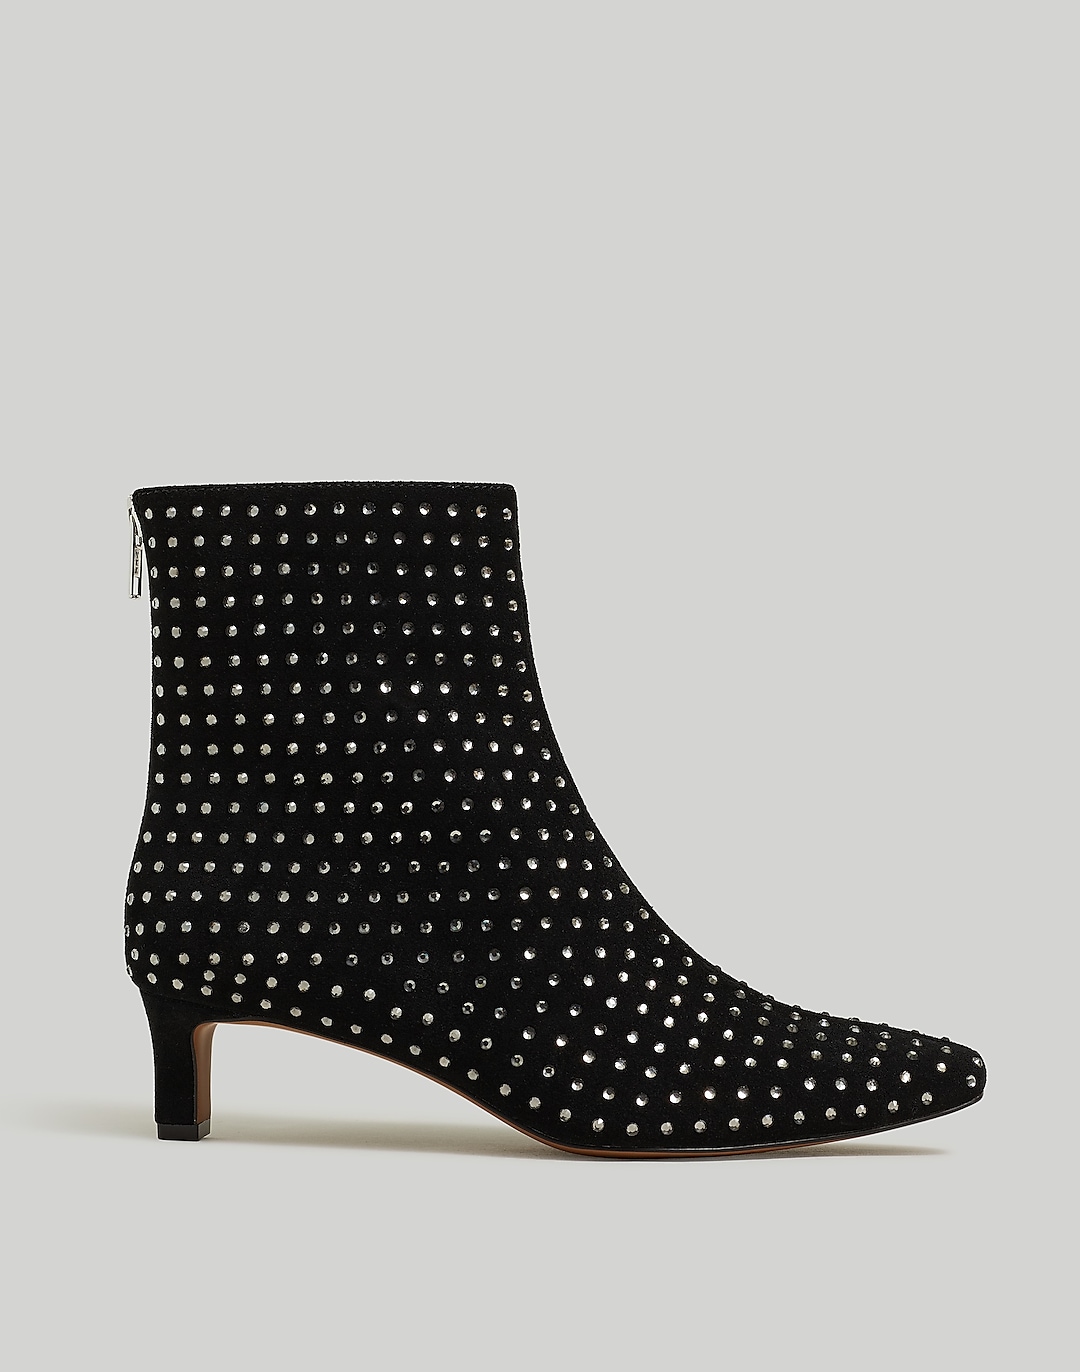 The Dimes Kitten-Heel Boot in Crystal-Embellished Suede | Madewell